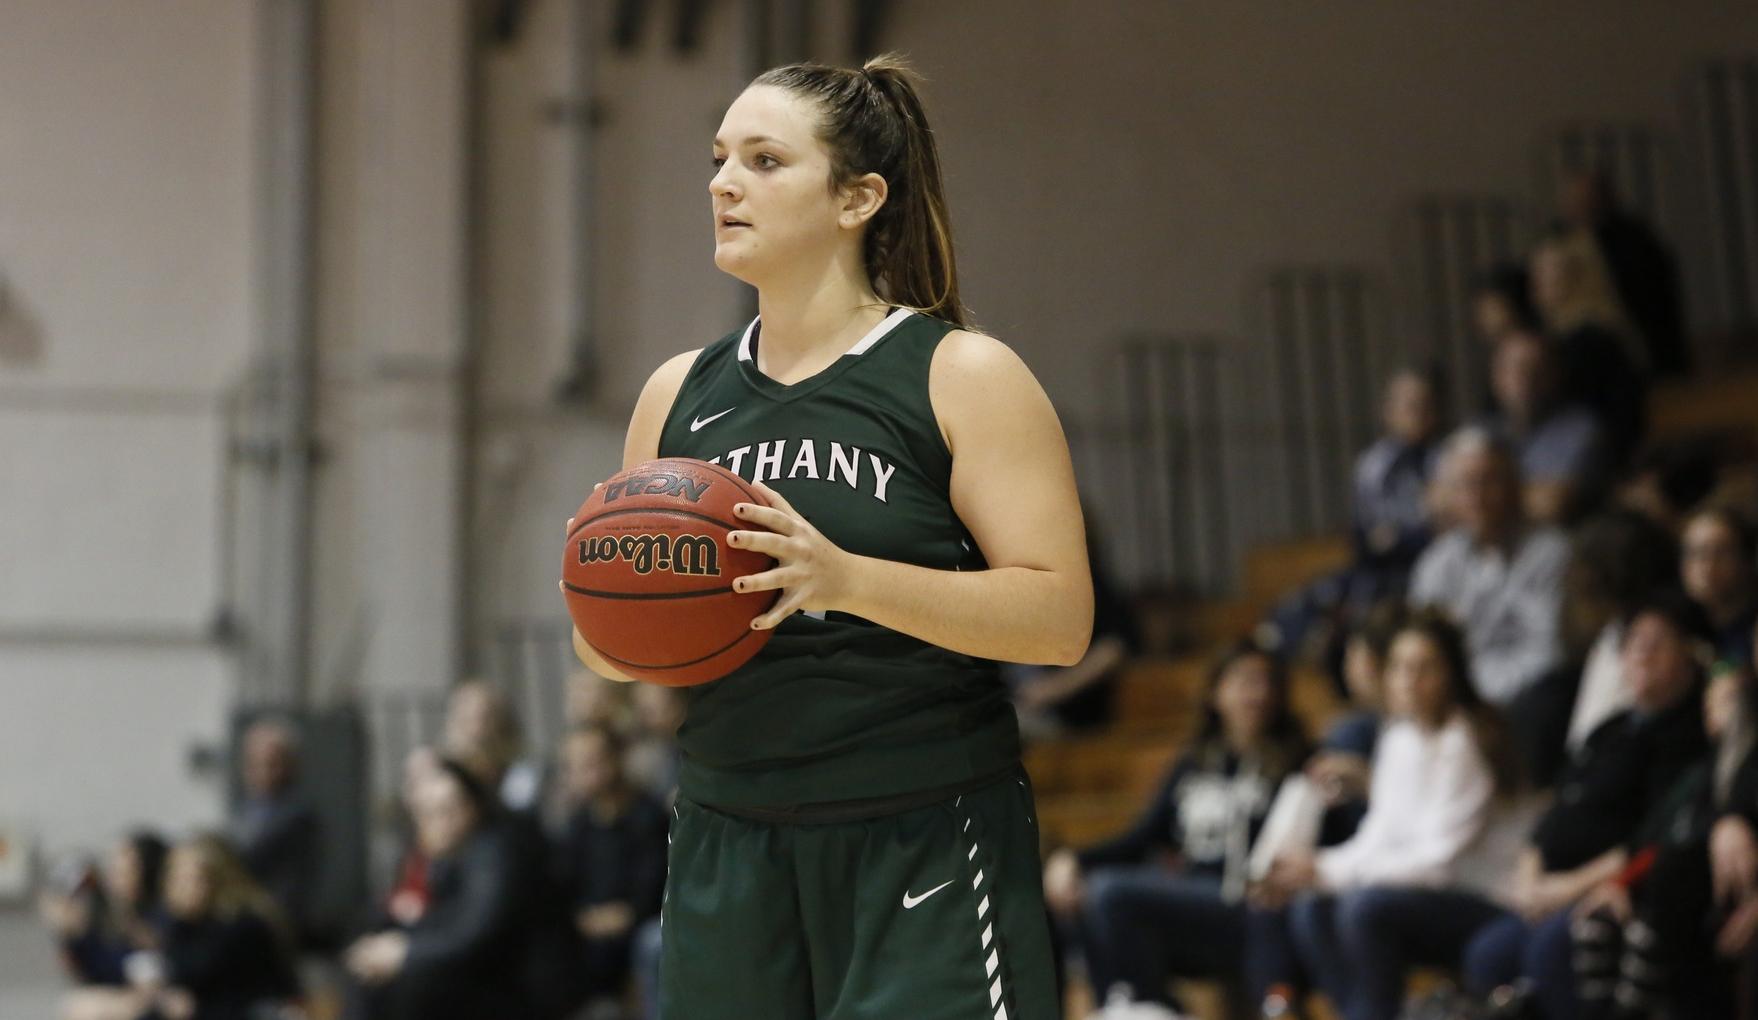 Bethany rally falls short against Saint Vincent, 54-48